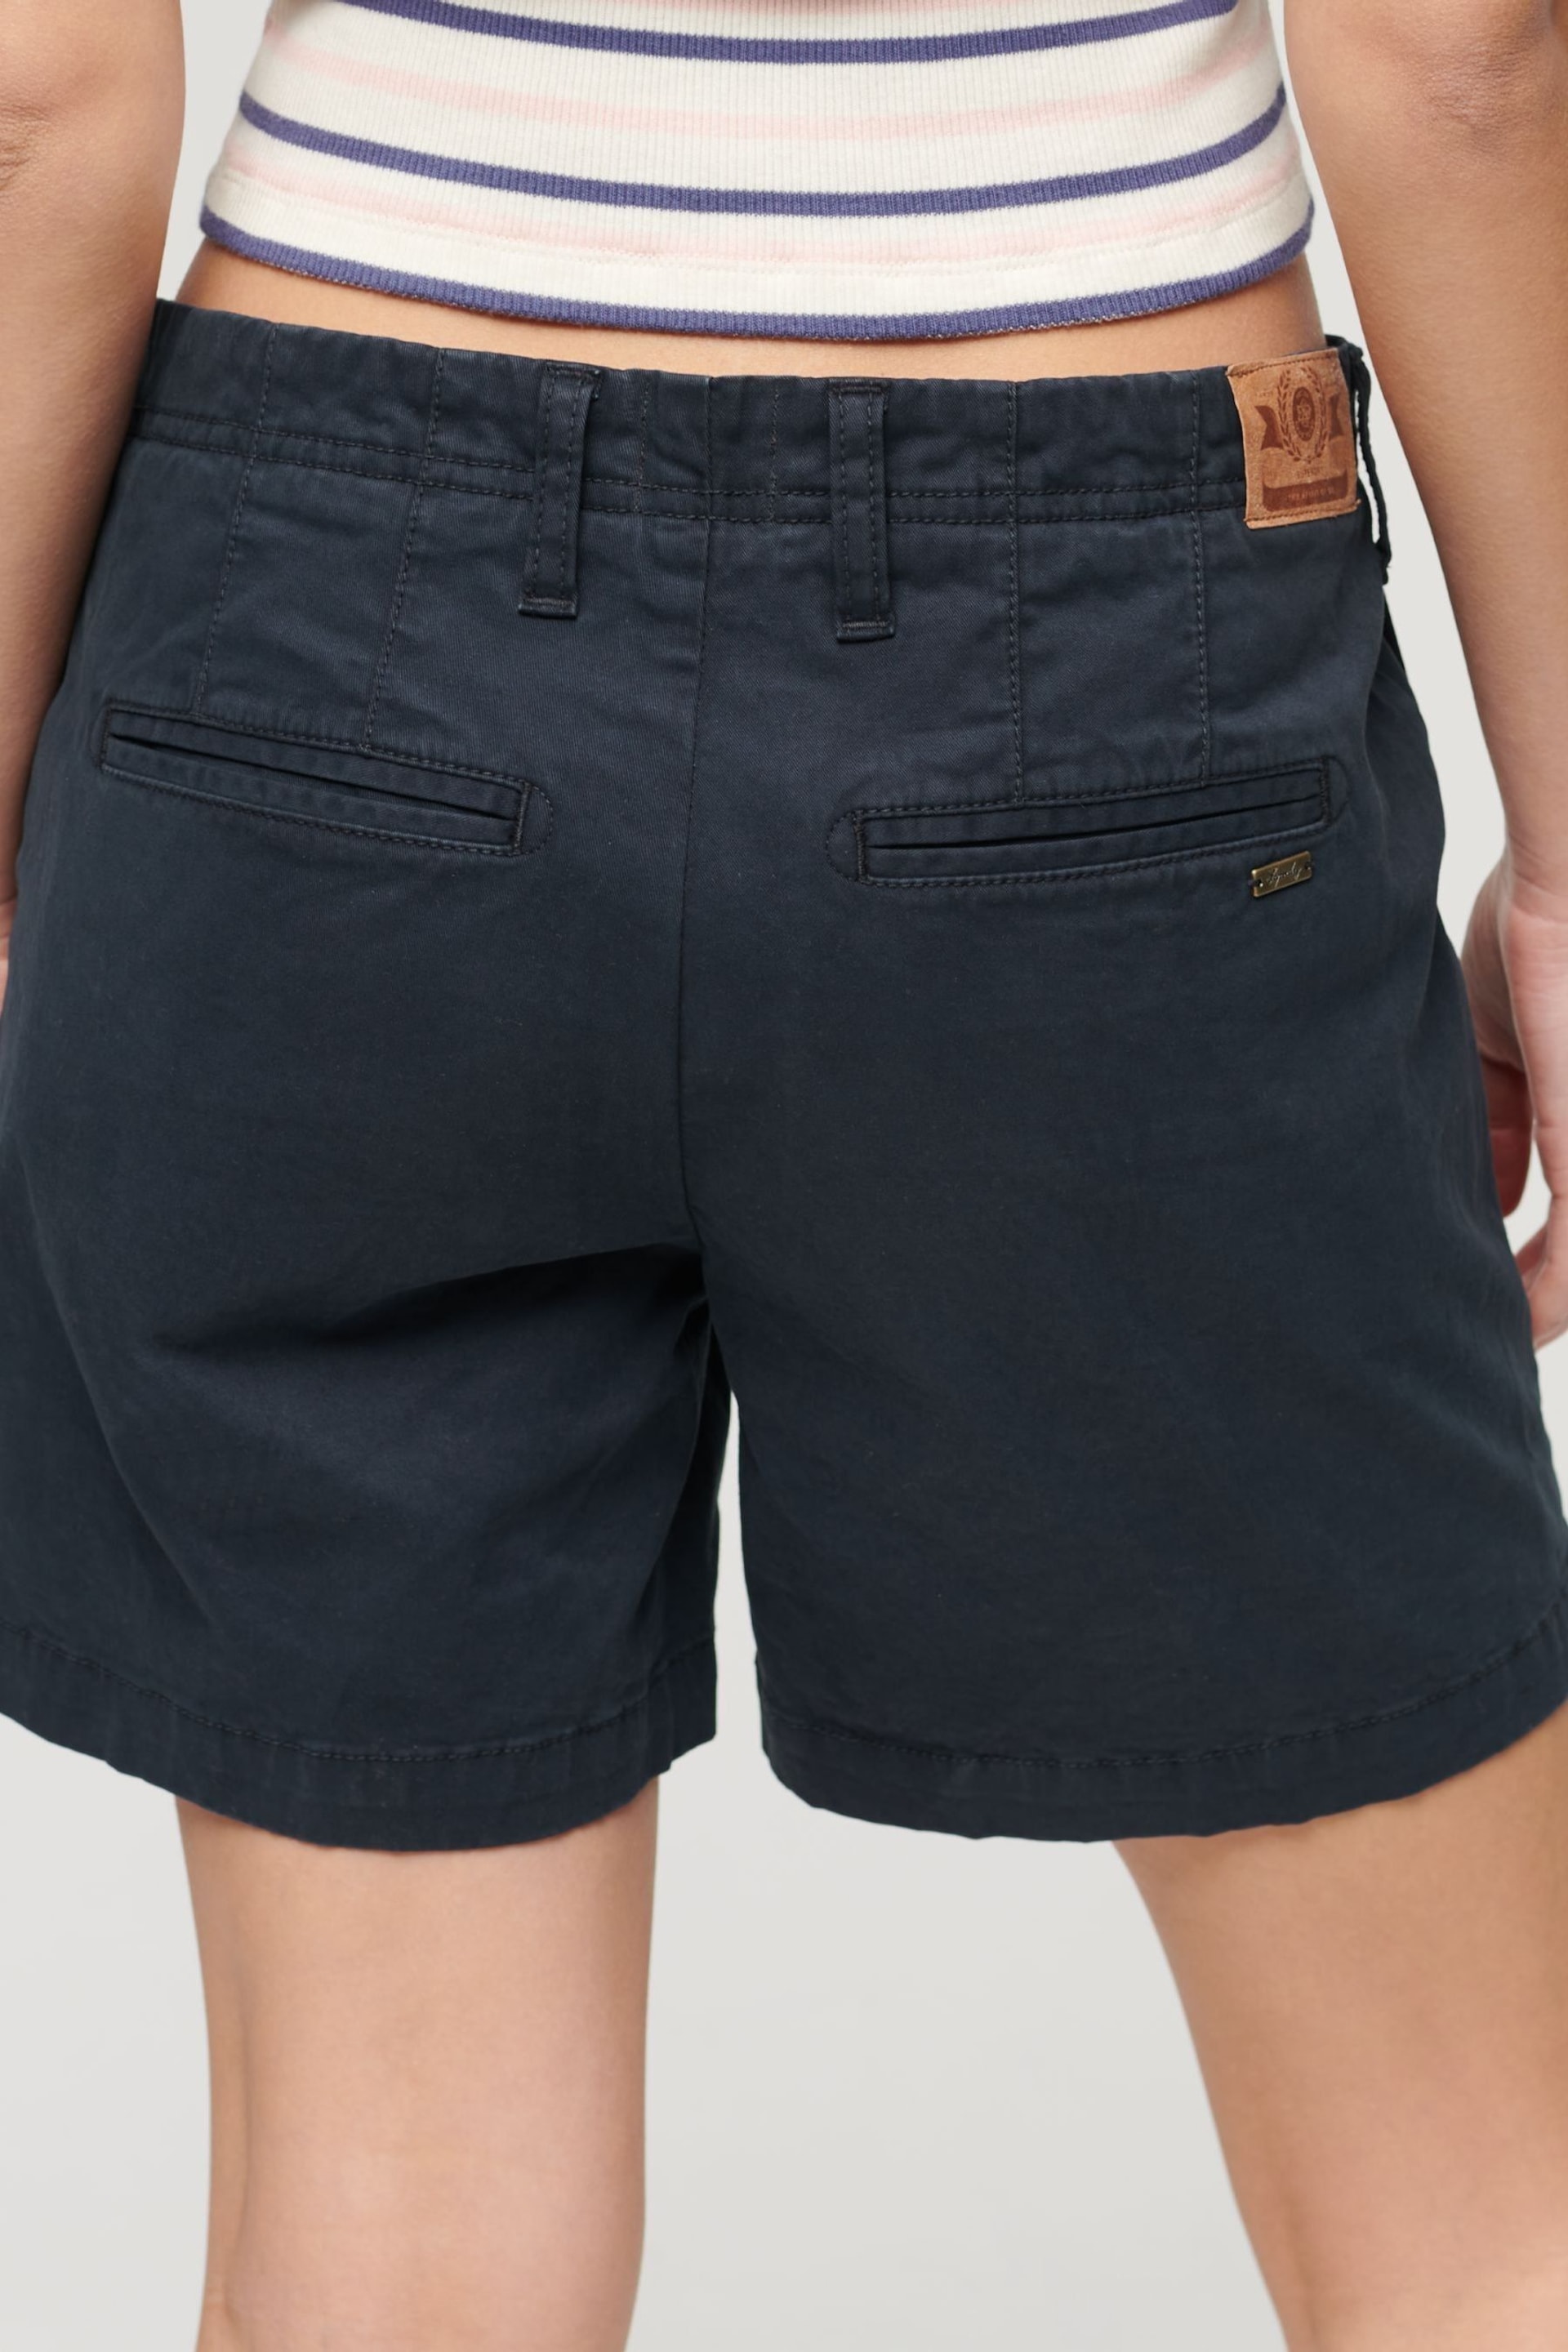 Superdry Blue Classic Chino Shorts - Image 2 of 6